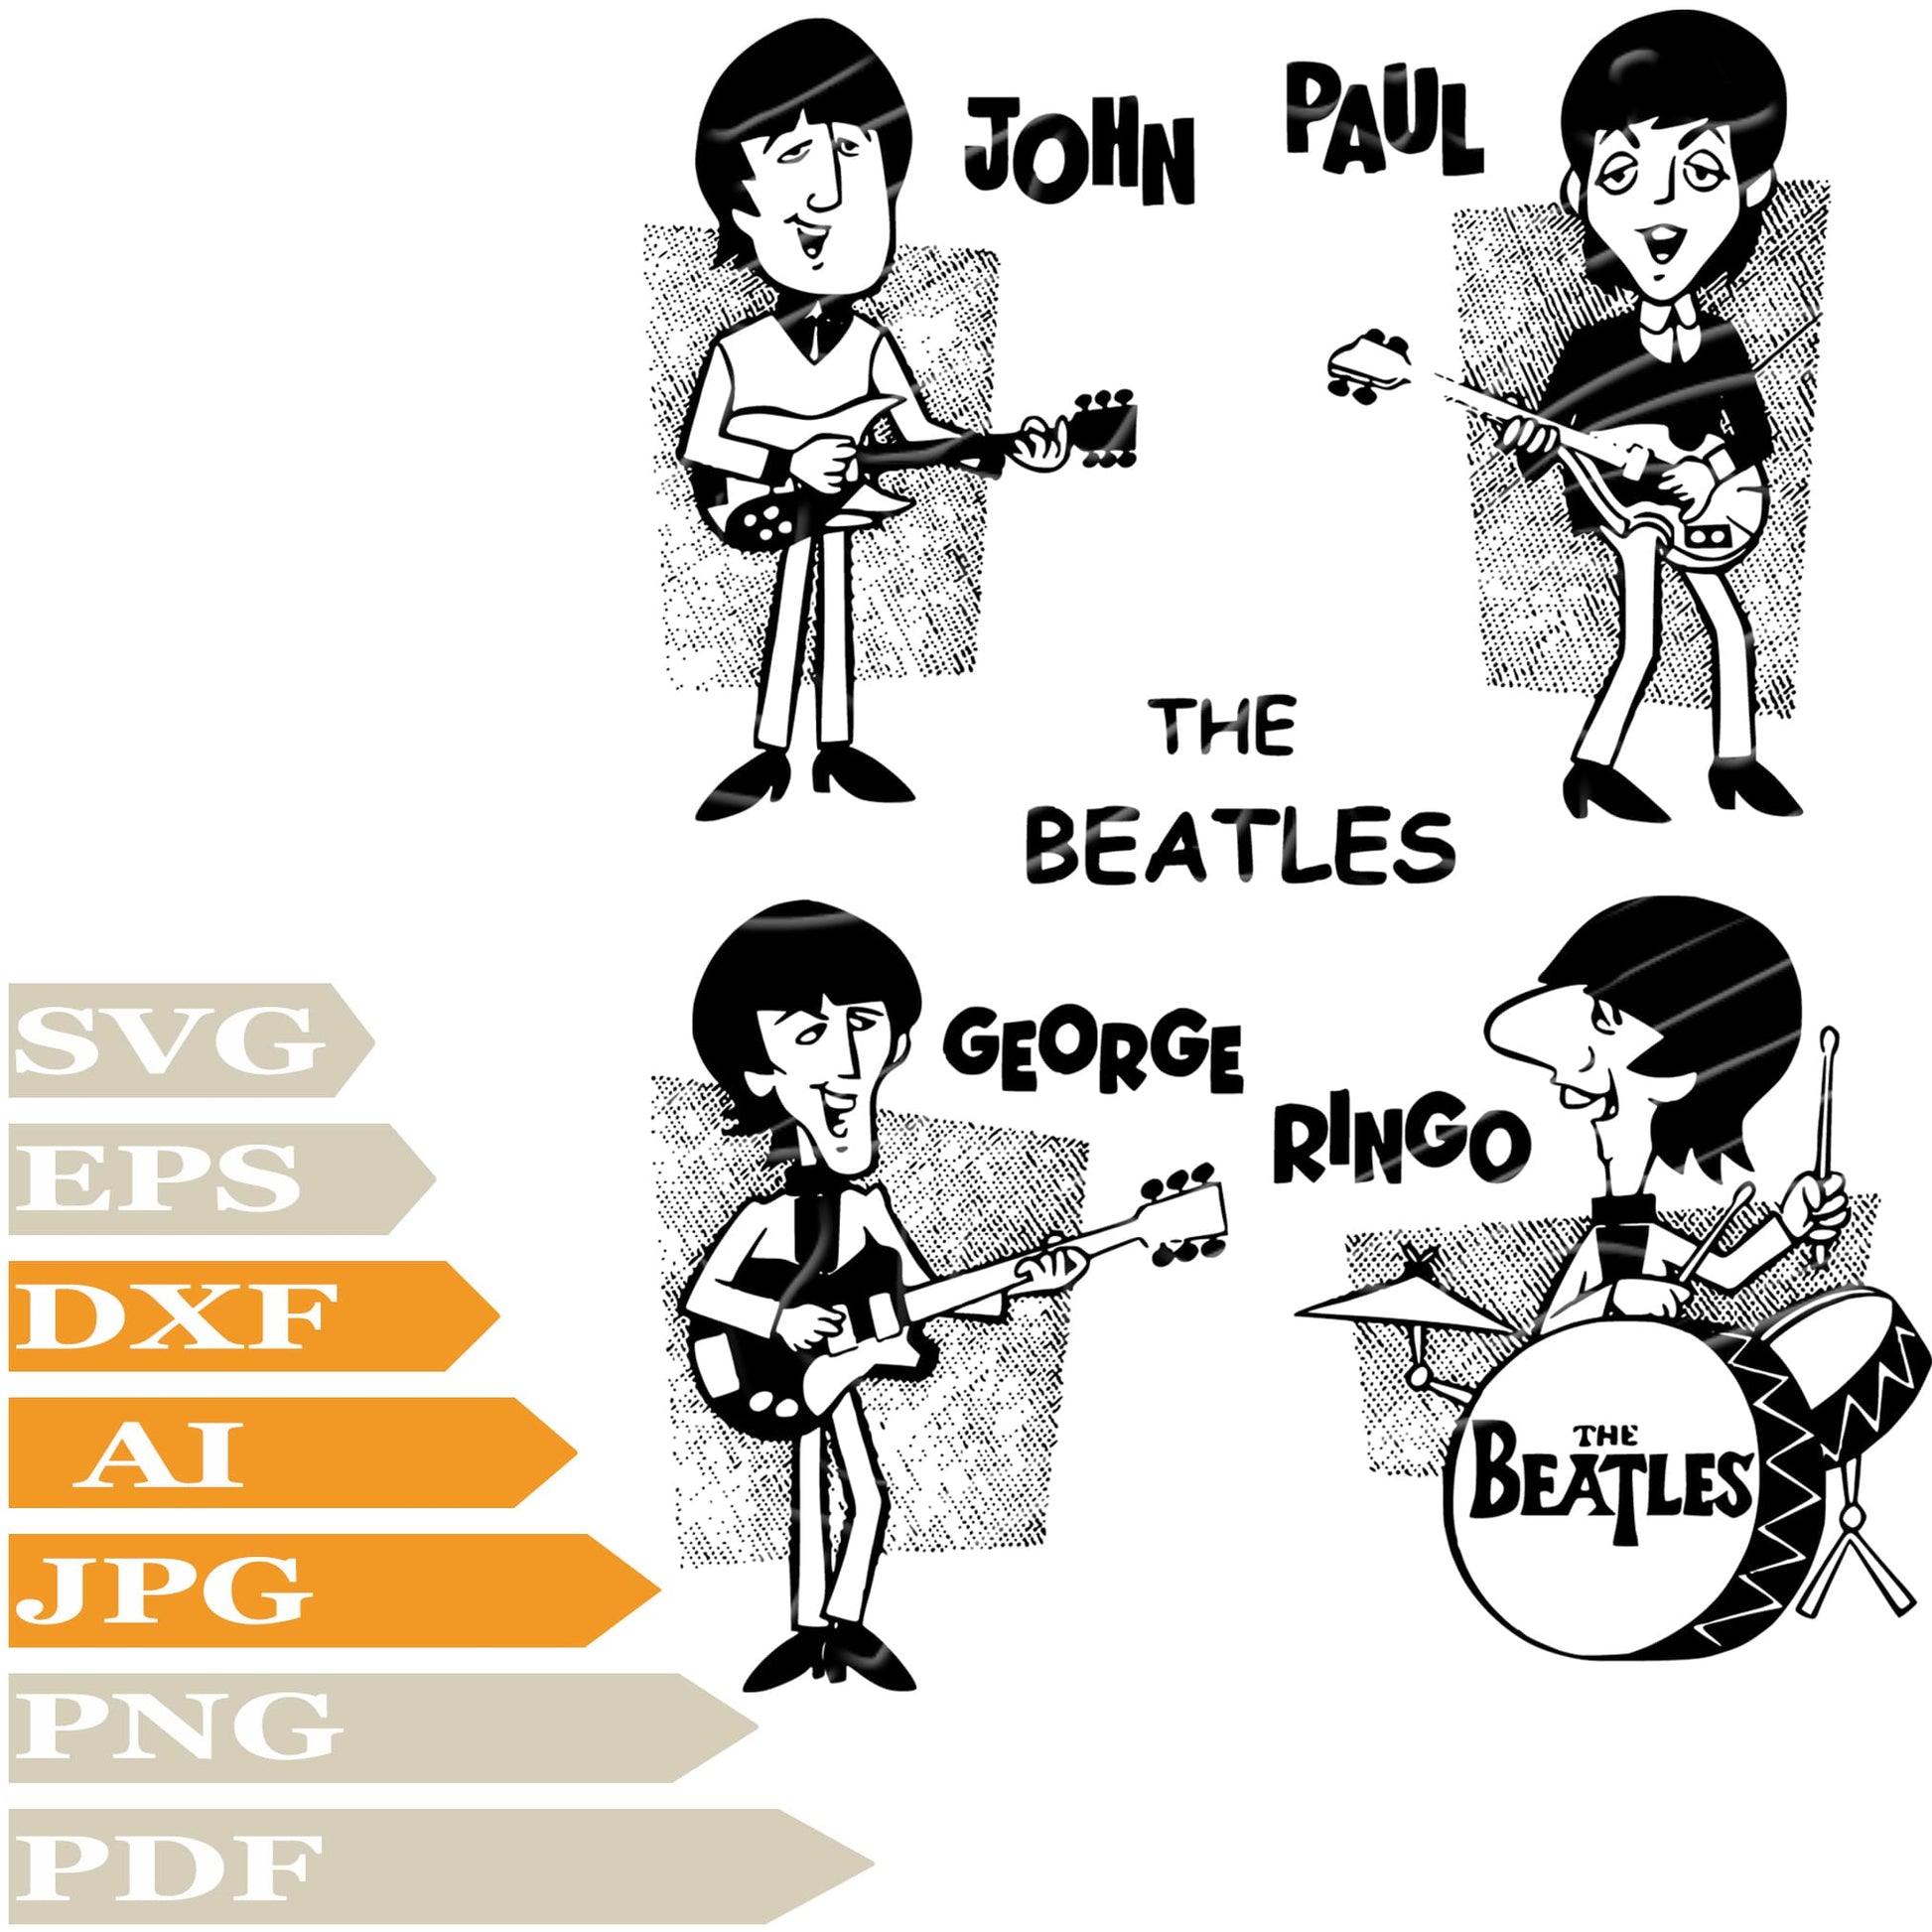 The Beatles SVG-Music Band The Beatles Personalized SVG-Members Of The Beatles Drawing SVG-The Beatles Vector Illustration-PNG-Decal-Cricut-Digital Files-Clip Art-Cut File-For Shirts-Silhouette